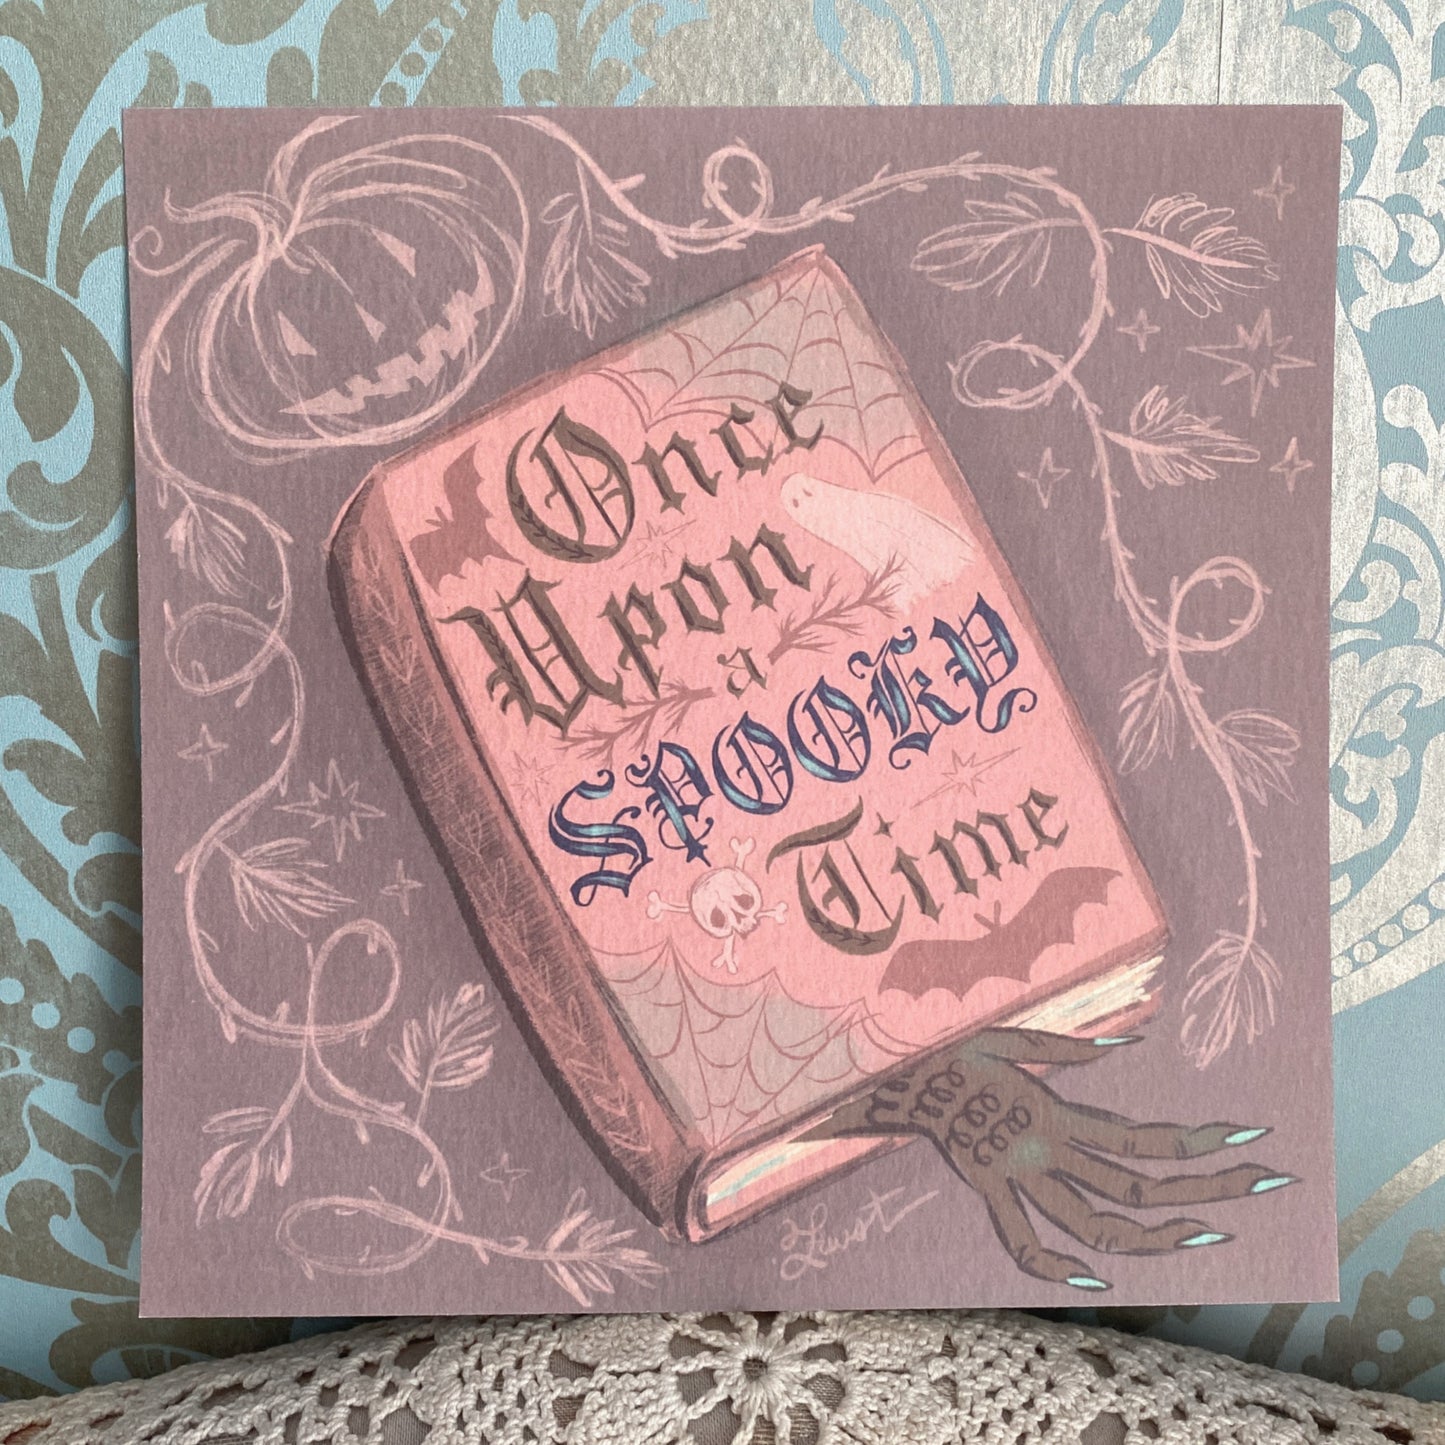 Once Upon a Spooky Time - 8x8 Art Print